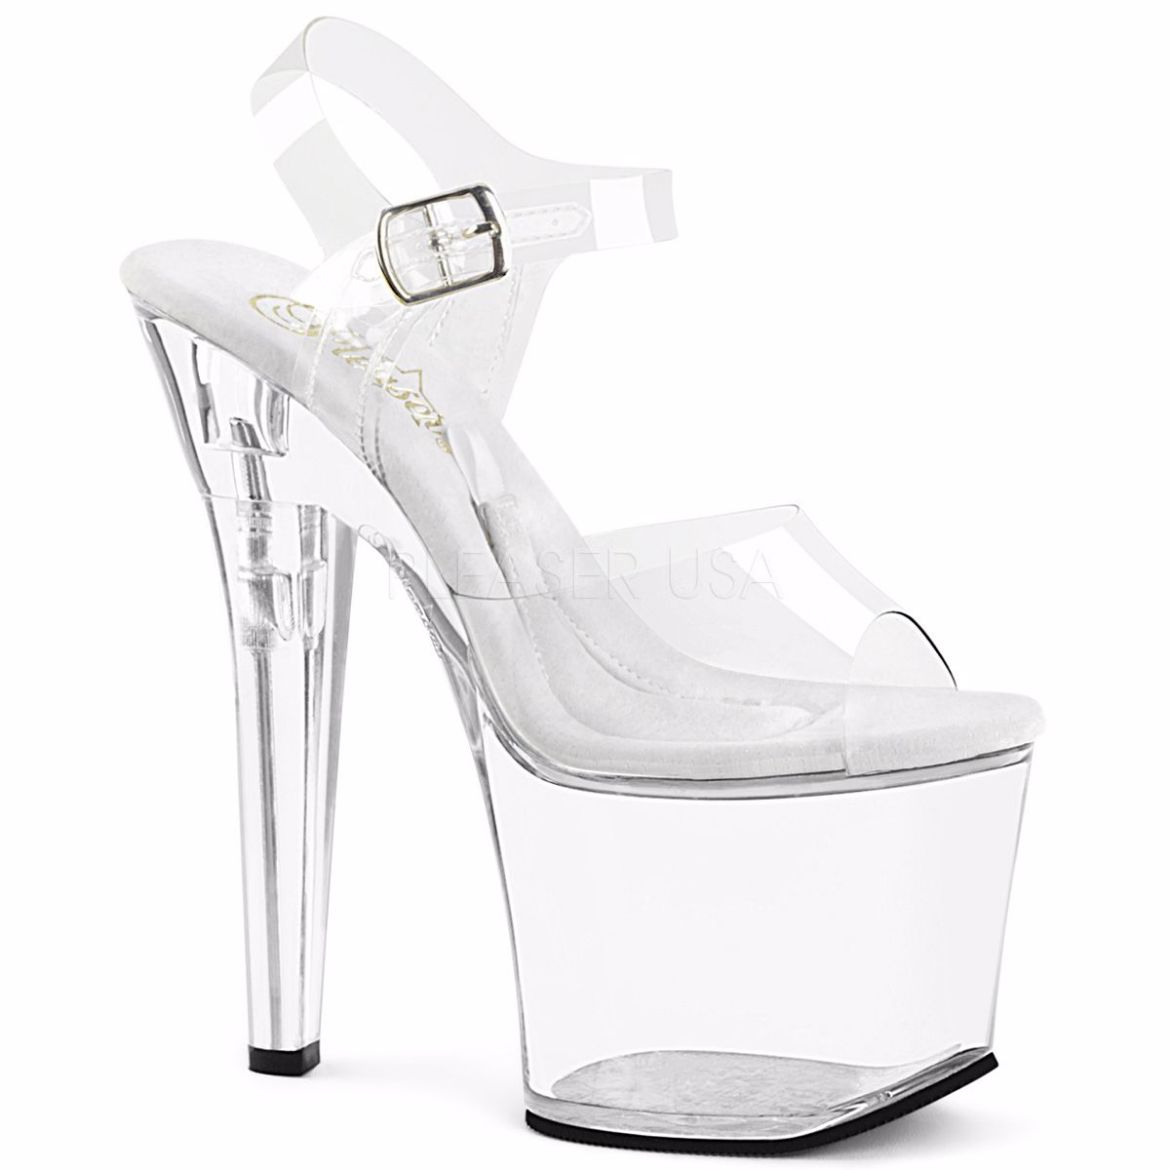 Product image of Pleaser Treasure-708 Clear/Clear, 7 inch (17.8 cm) Heel, 2 3/4 inch (7 cm) Platform Sandal Shoes